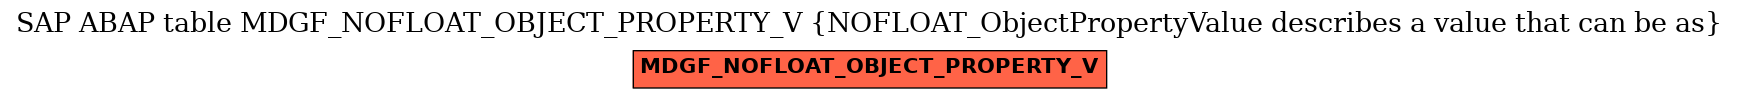 E-R Diagram for table MDGF_NOFLOAT_OBJECT_PROPERTY_V (NOFLOAT_ObjectPropertyValue describes a value that can be as)